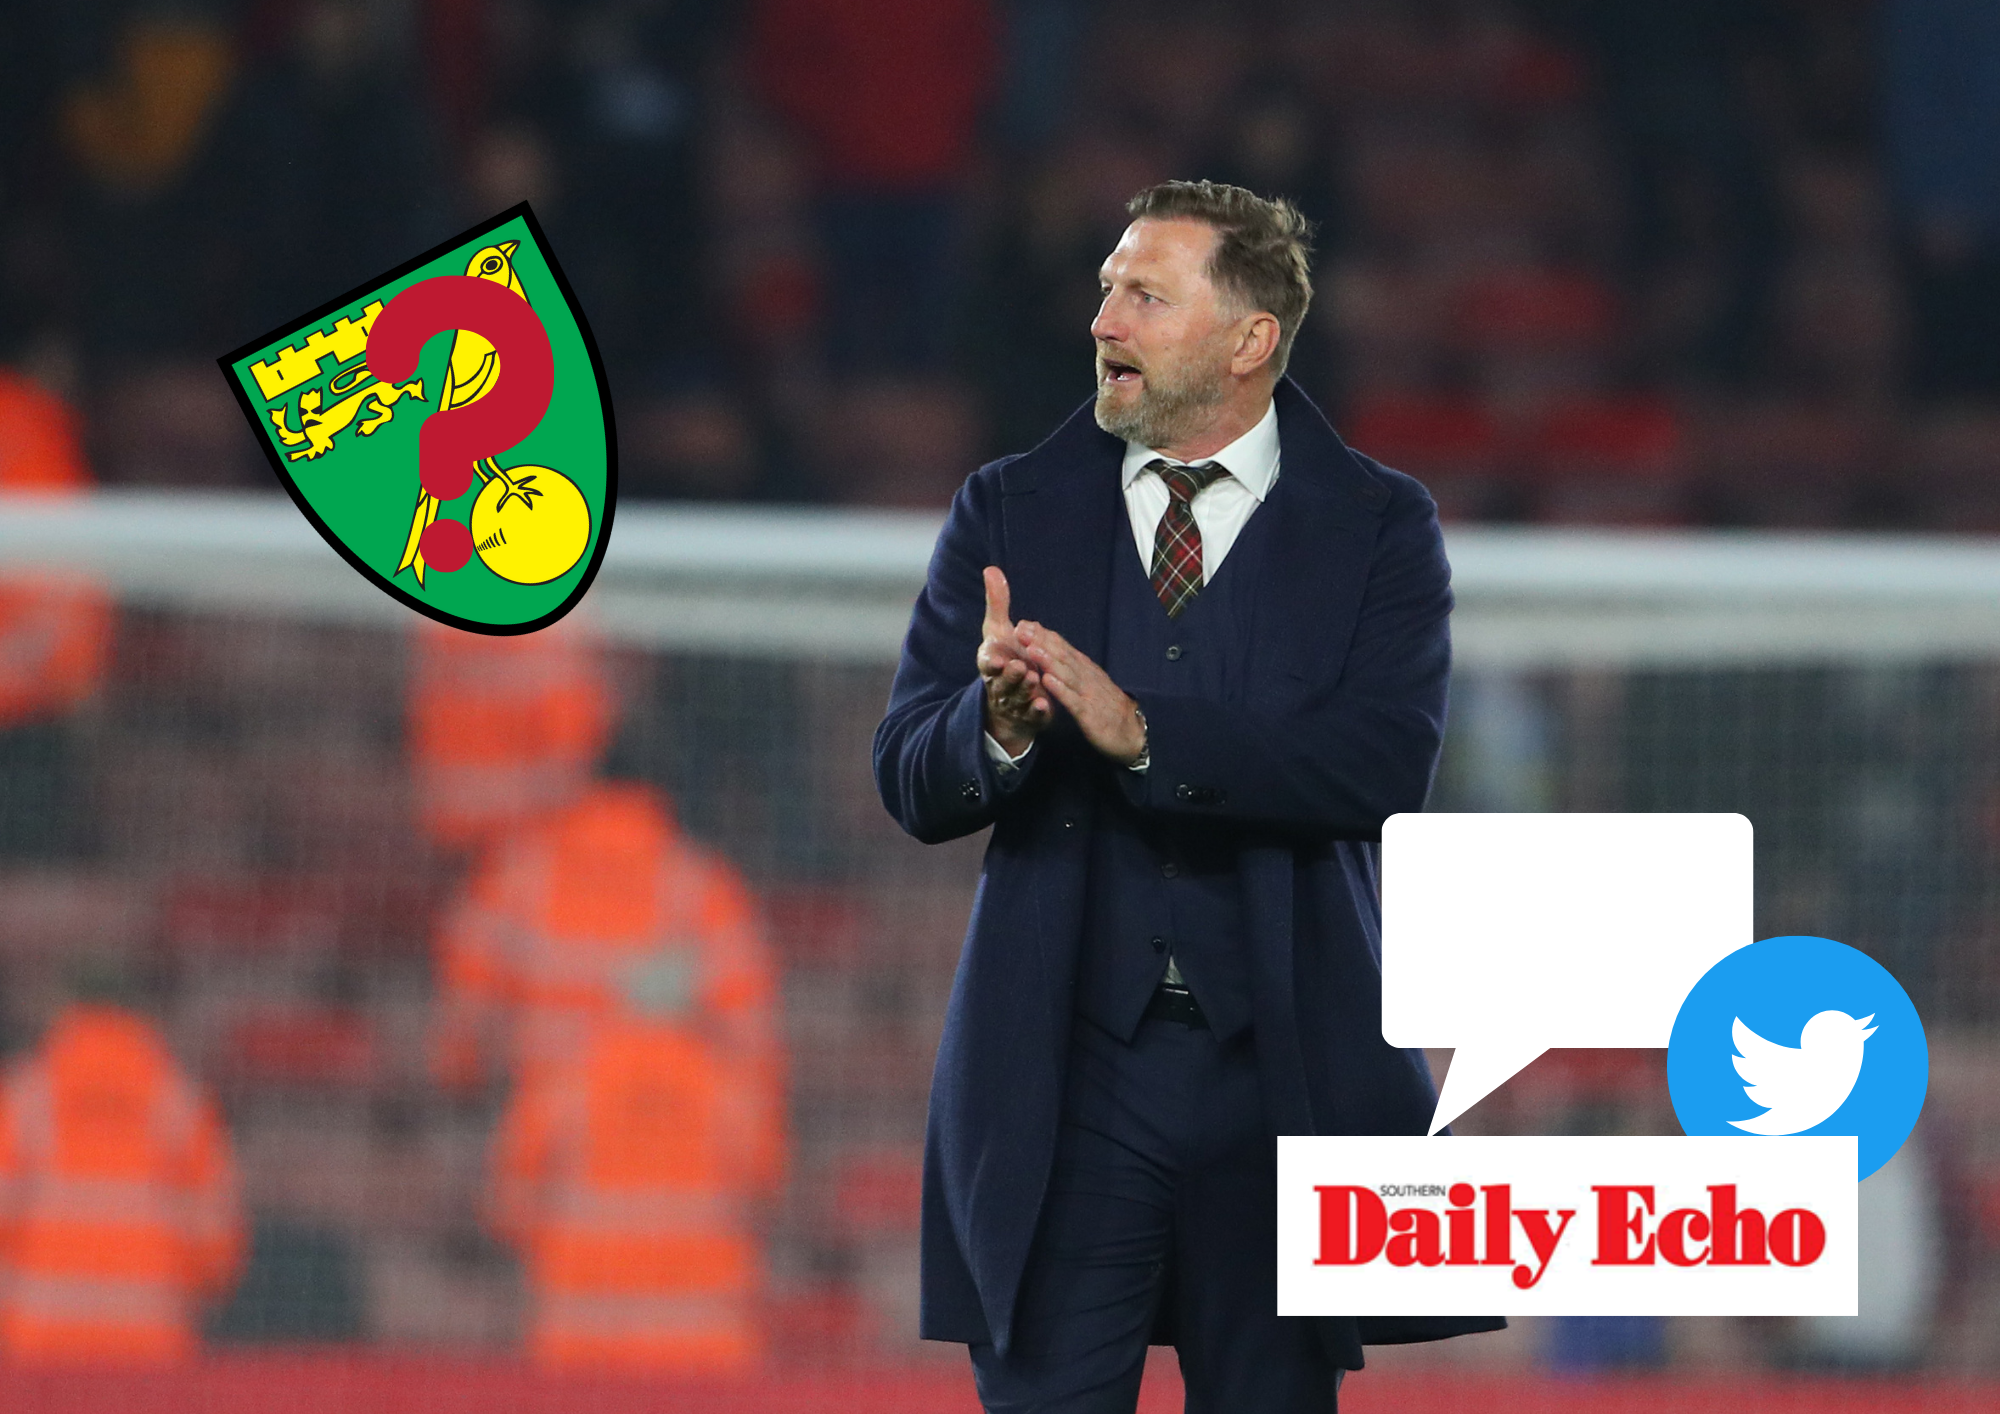 Southampton fans react to Ralph Hasenhuttl and Norwich links